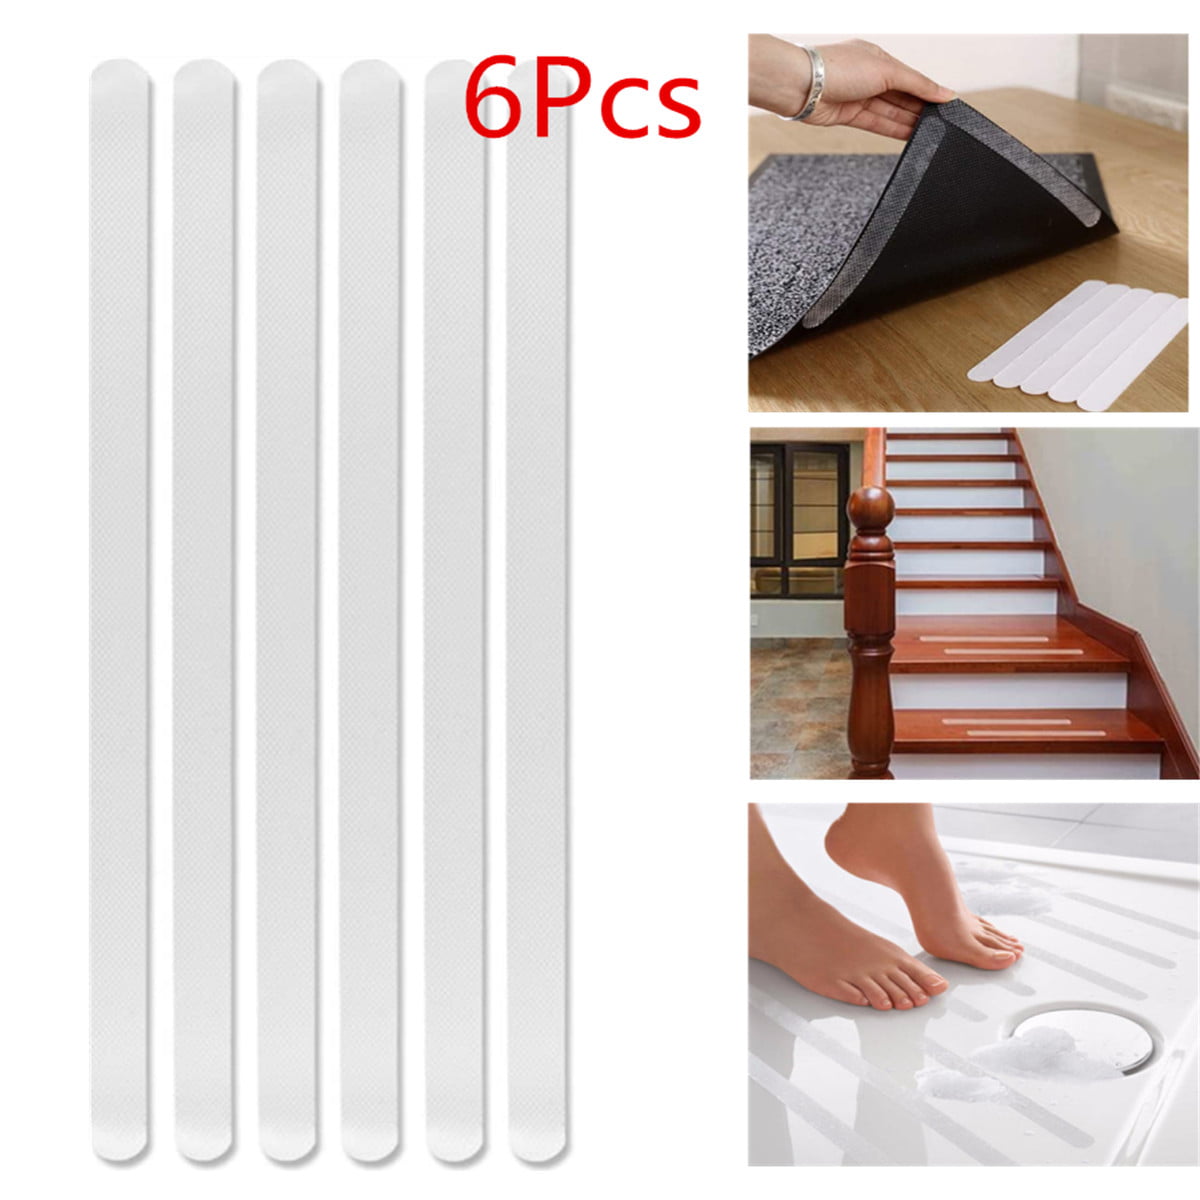 Details about   Anti Non Slip Bath Grip Stickers Shower Strips Flooring Safety Tape Pad 12PCS 